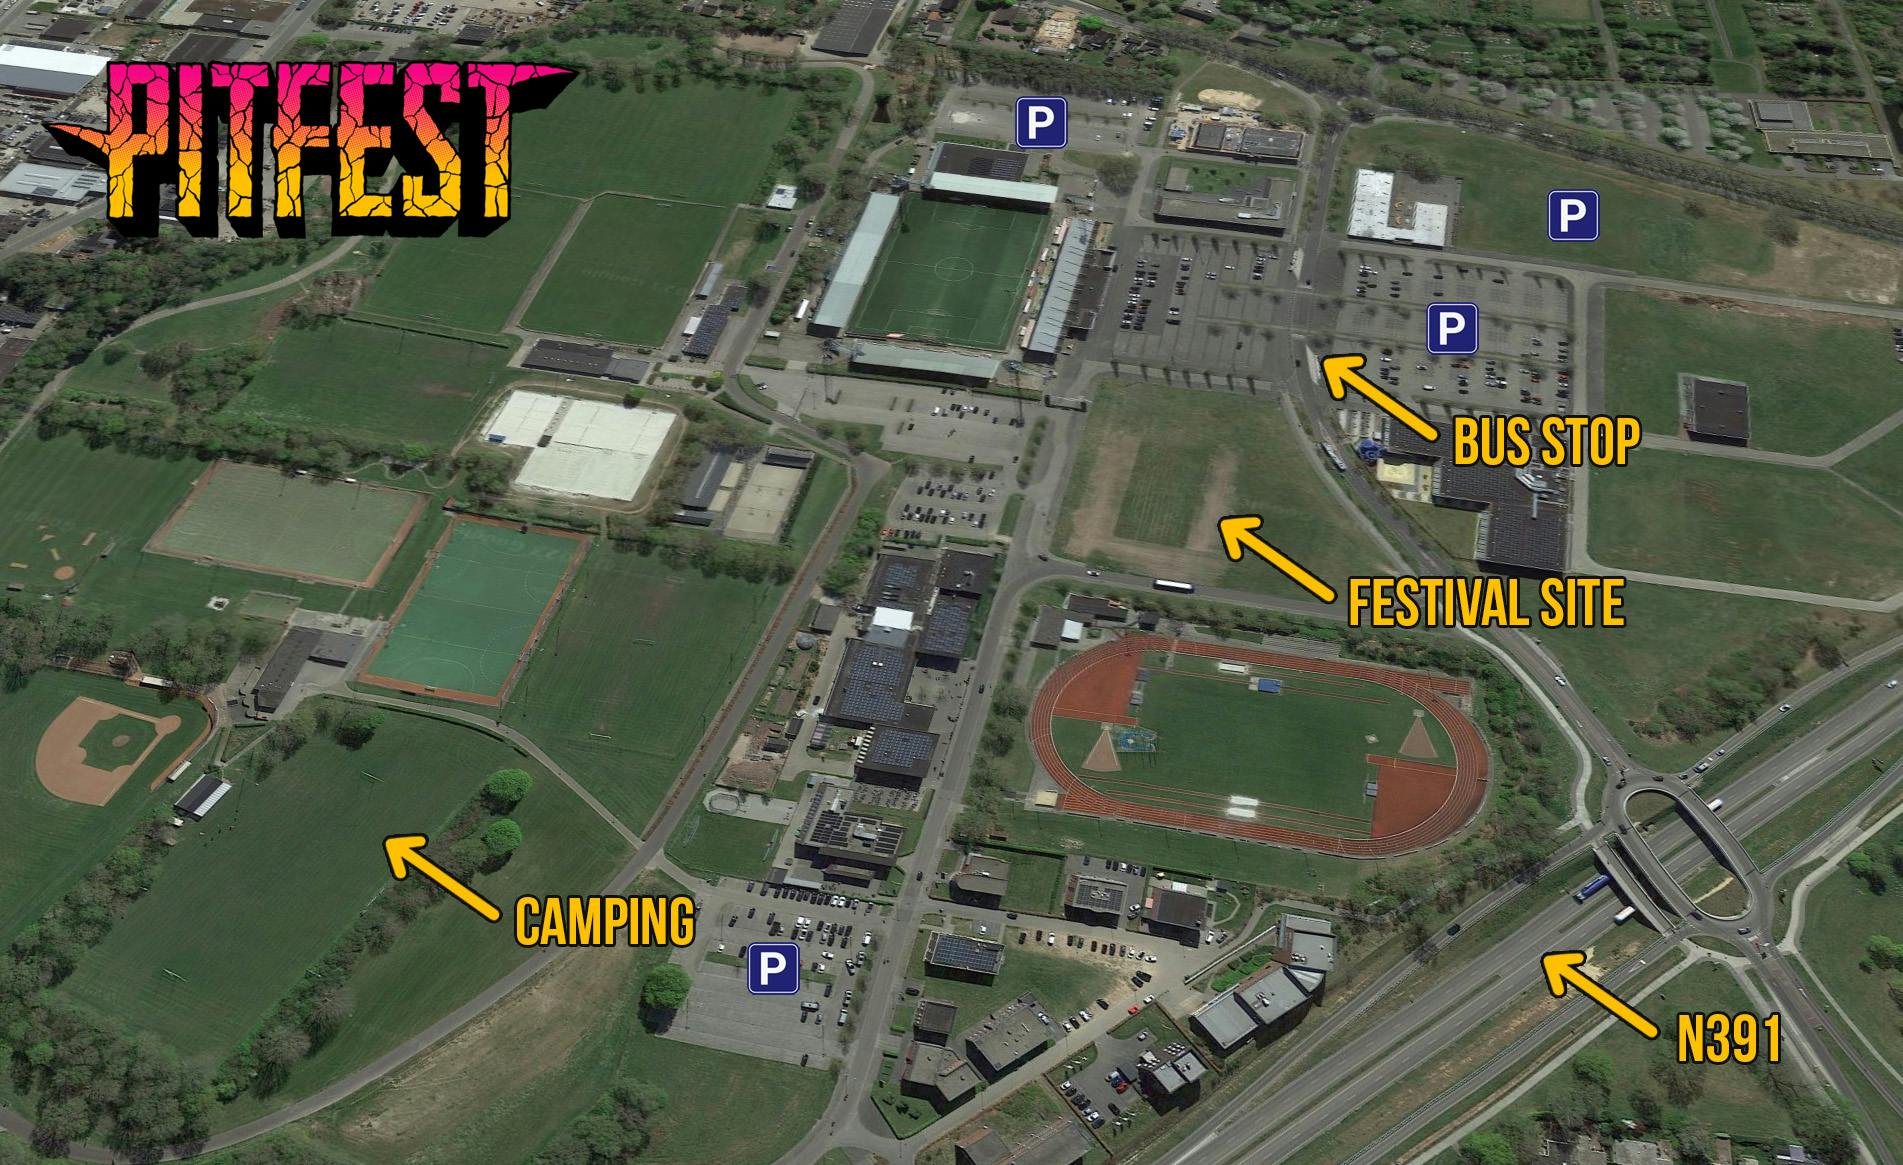 More info on Pitfest location and travel options